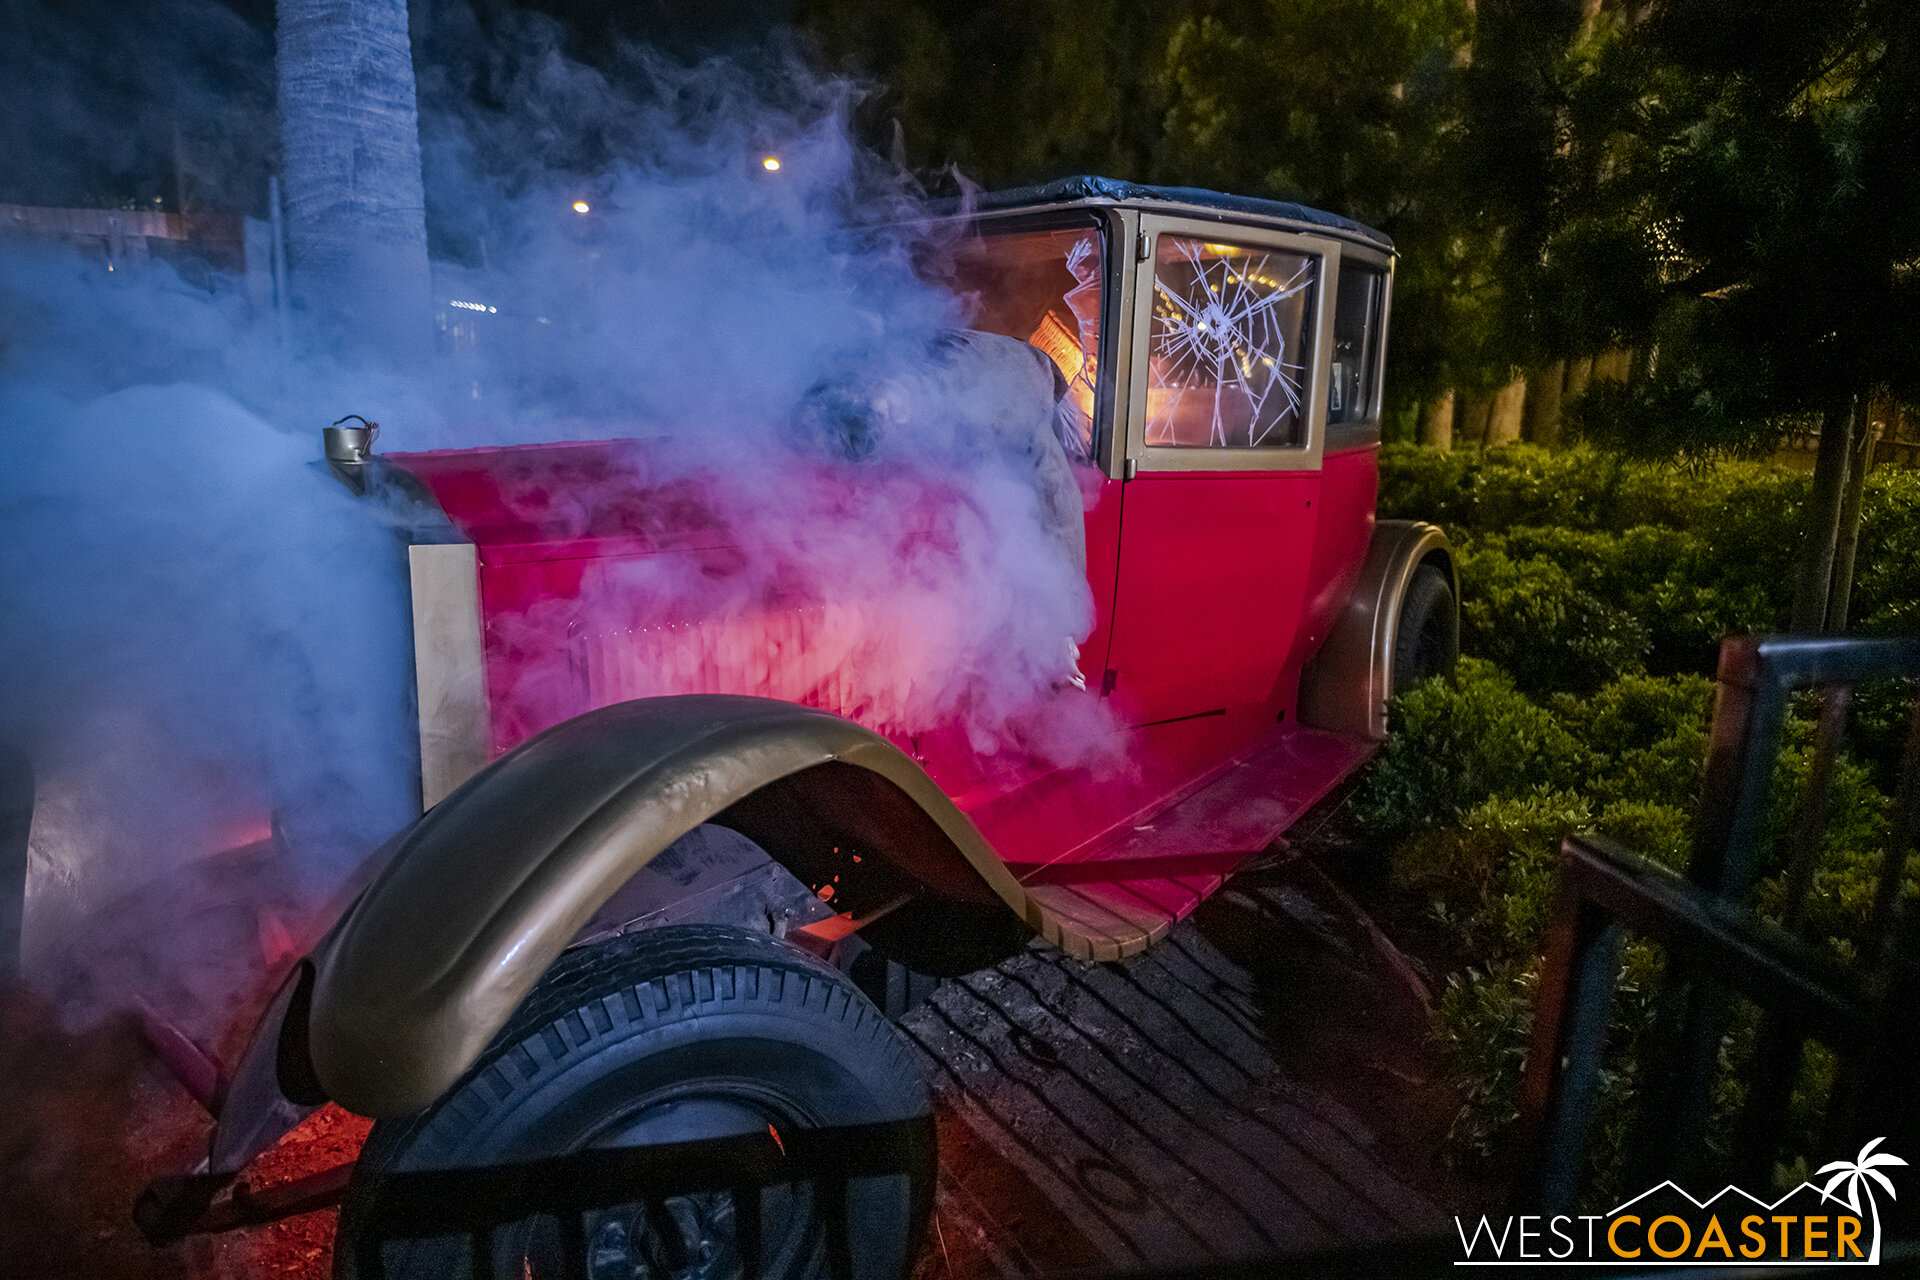  Immediately upon passing the Calico Railroad tracks, we encountered a classic red coach car crashed at a railing, with smoke (or fog) billowing from the accident scene.   